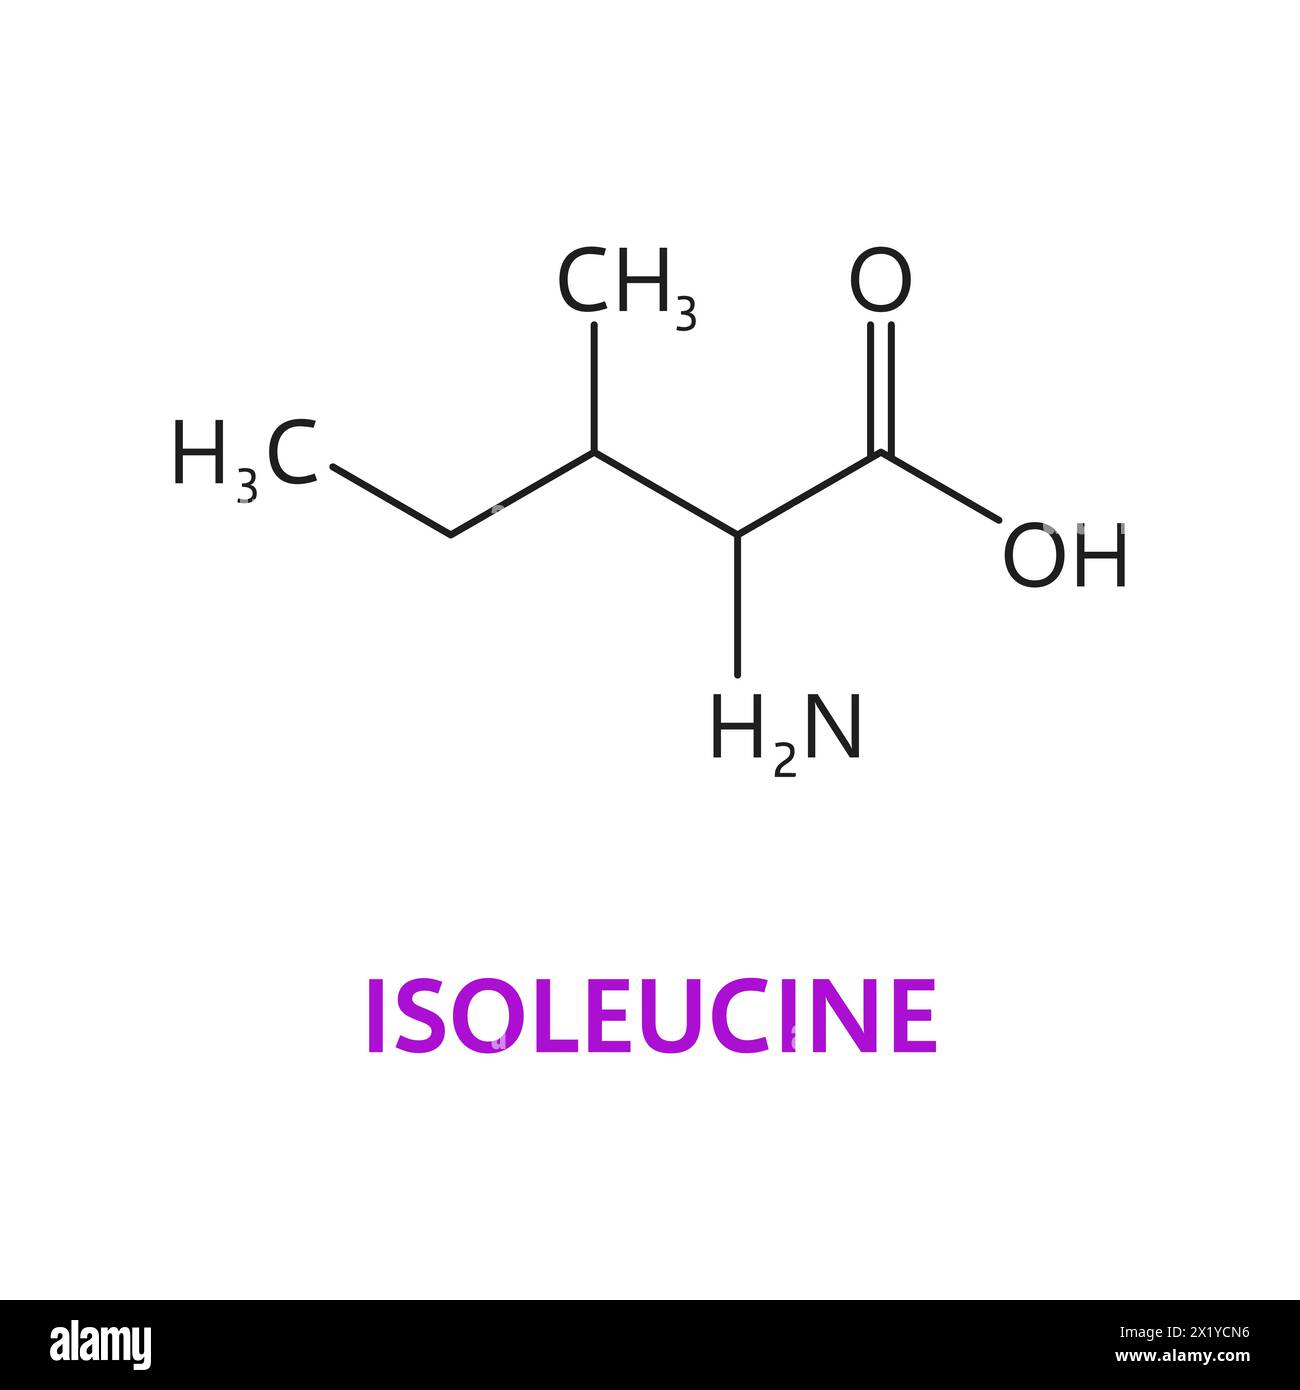 Isoleucine amino acid chemical molecules, essential chain structure. Isolated vector Isoleucine formula c6h13no2, featuring branched-chain structure crucial for protein synthesis and muscle metabolism Stock Vector